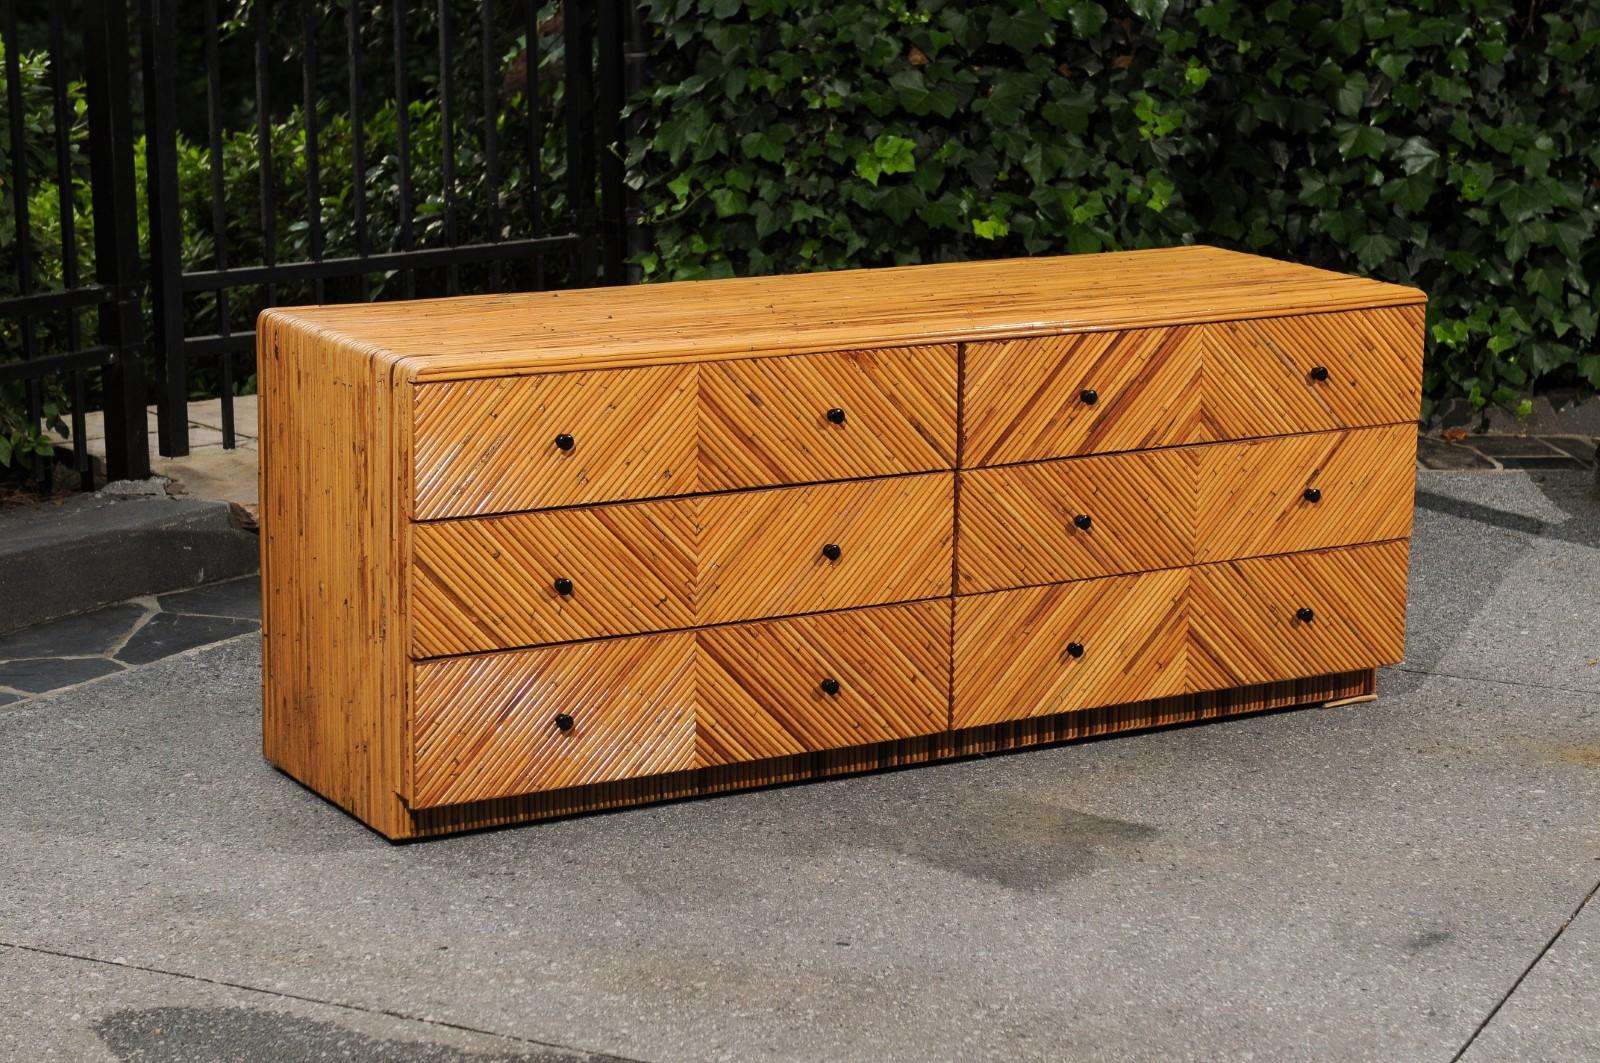 This magnificent chest is shipped as professionally photographed and described in the listing narrative: Meticulously professionally restored and completely installation ready.

A breathtaking meticulously restored bamboo marquetry chest, circa